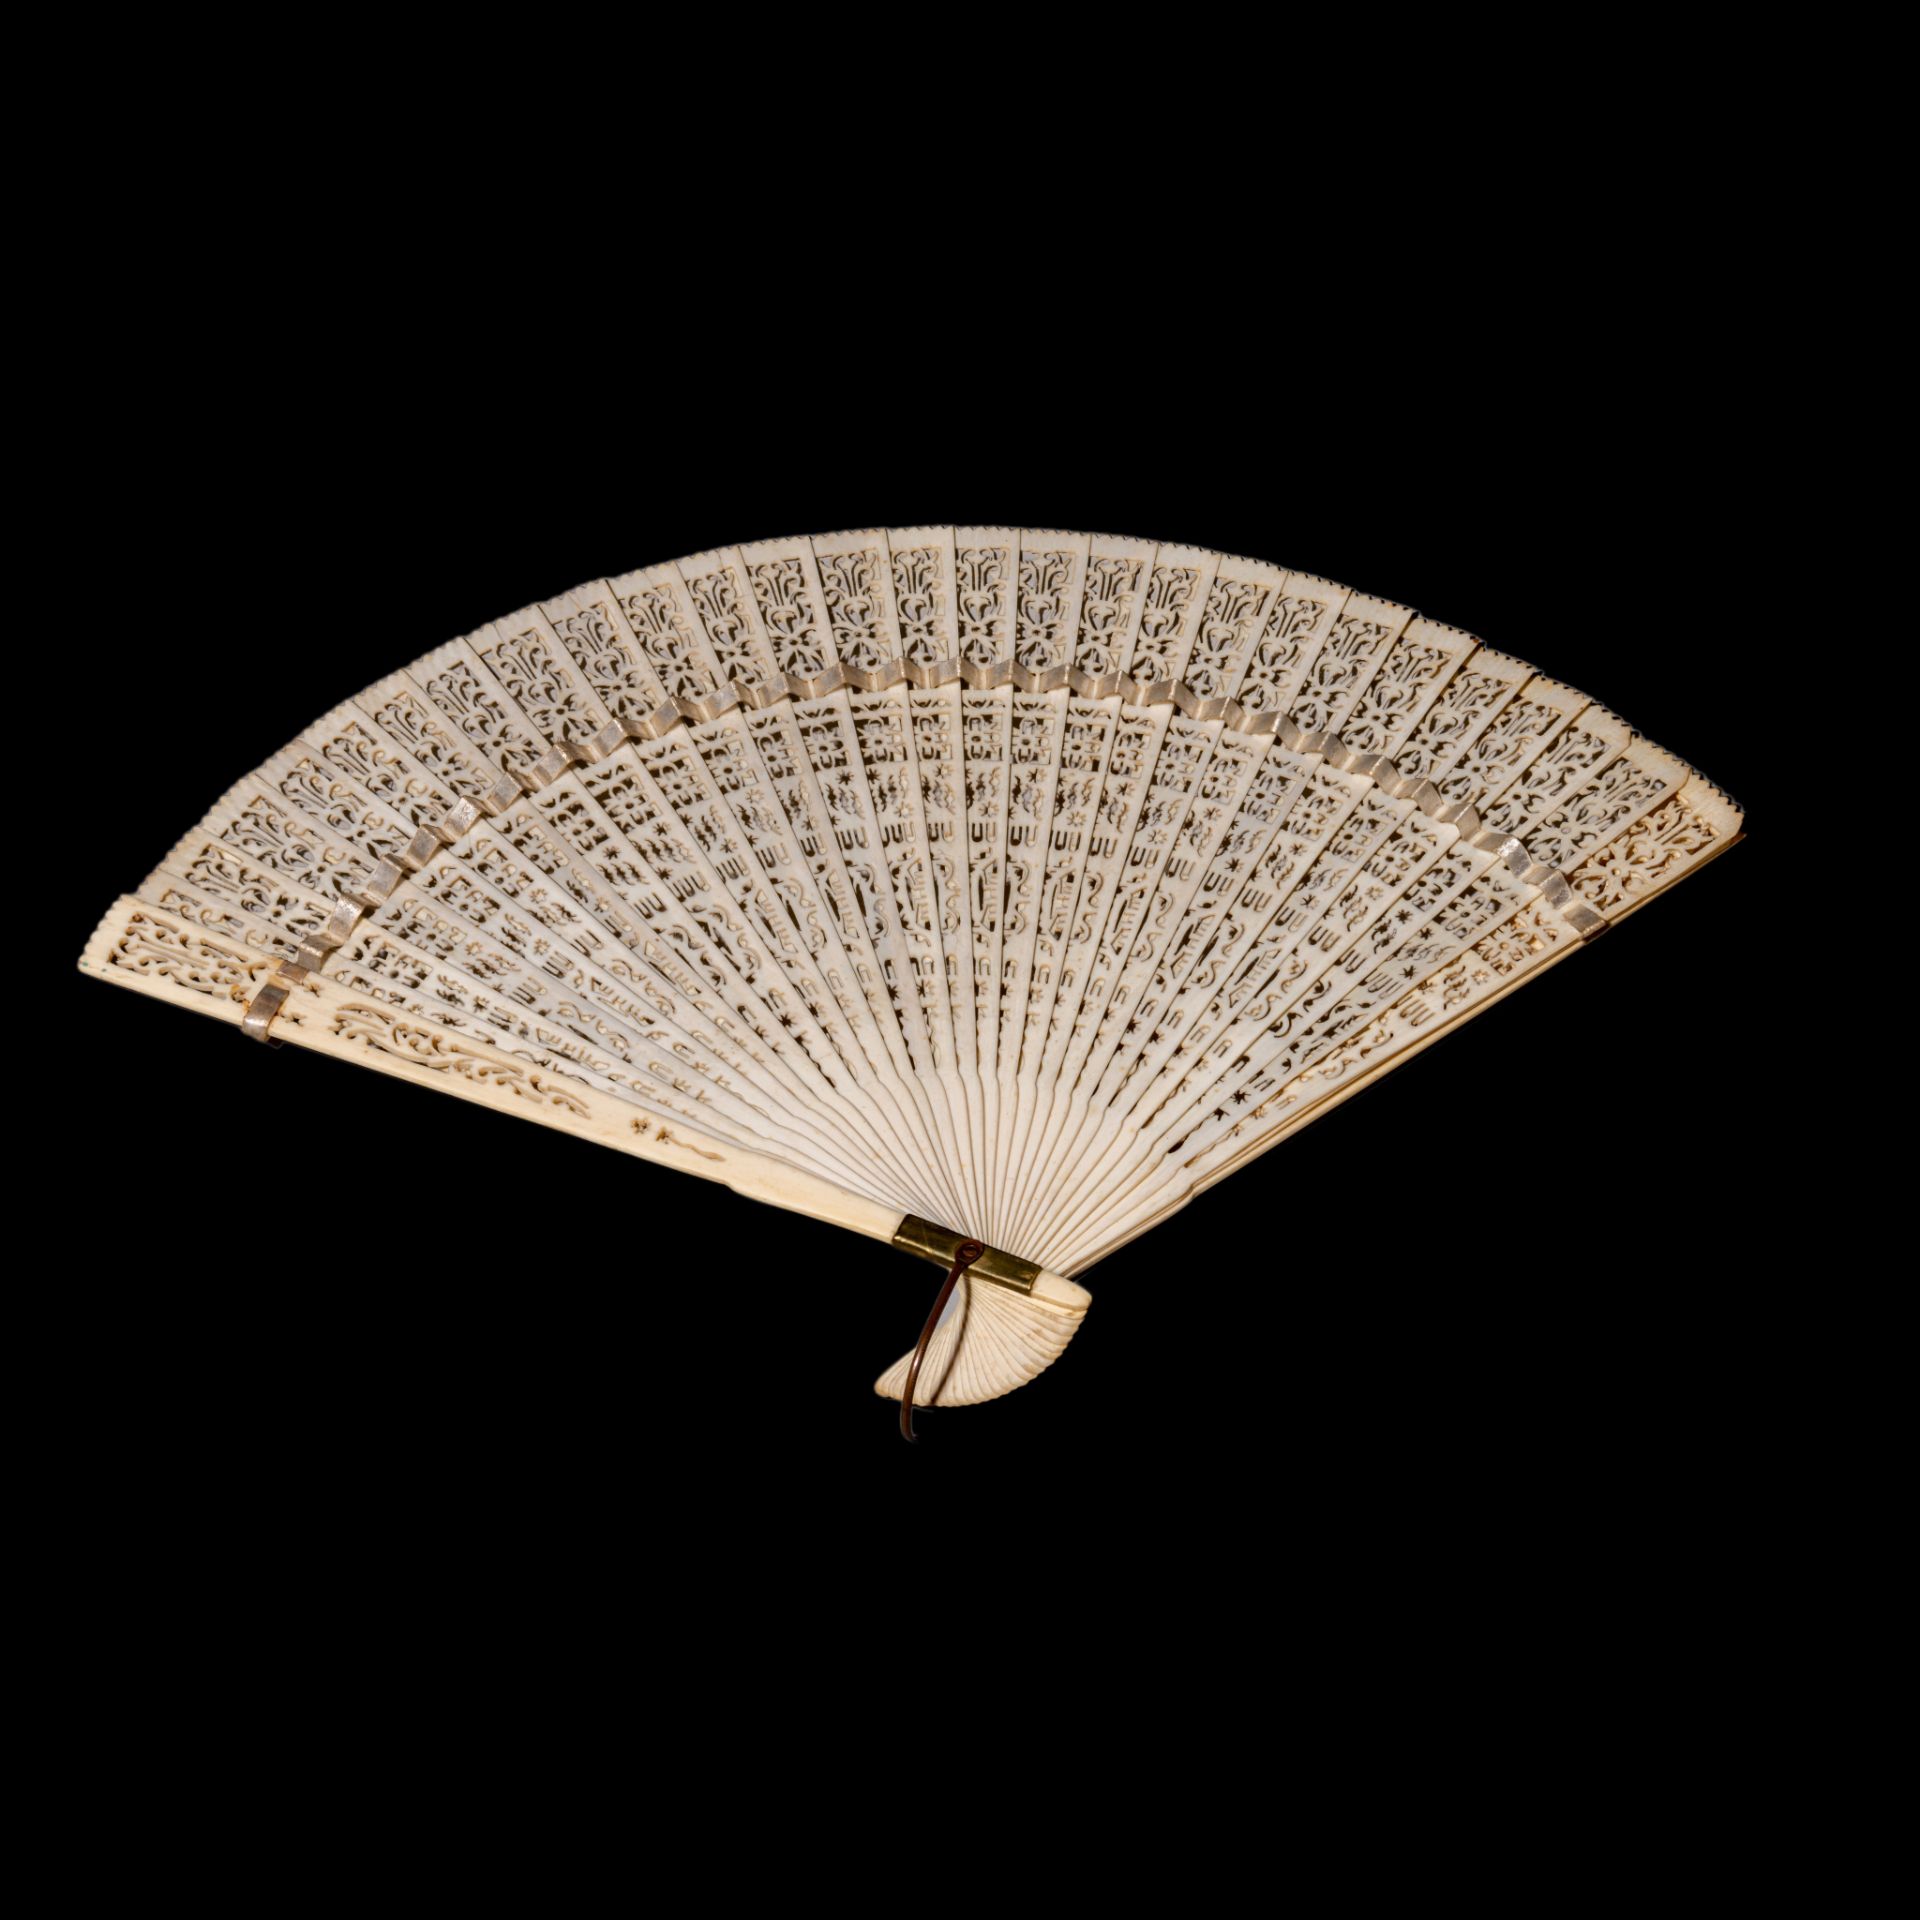 Three Chinese late Qing / early Republic ivory fans, H 16,4 - 19,4 - 20,3 cm / 39 - 77 - 54 g. - W f - Bild 7 aus 12